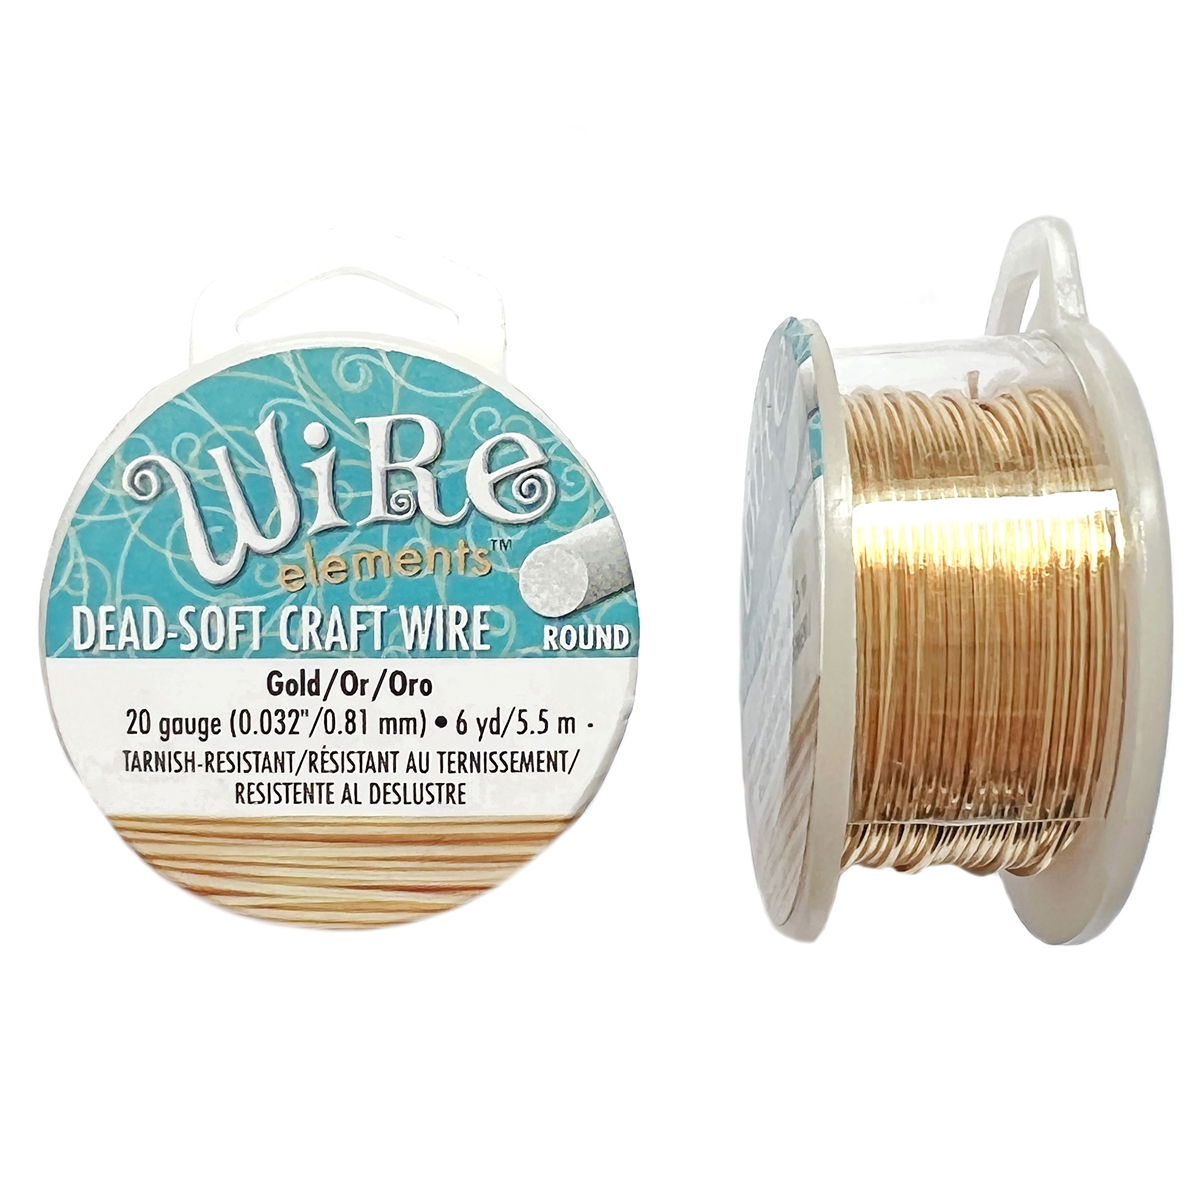 gold wire, jewelry wire, bead smith, 20 gauge, gold, wire, wire elements,  tarnish resistant, 6 yards, wire jewelry, jewelry making, vintage supplies